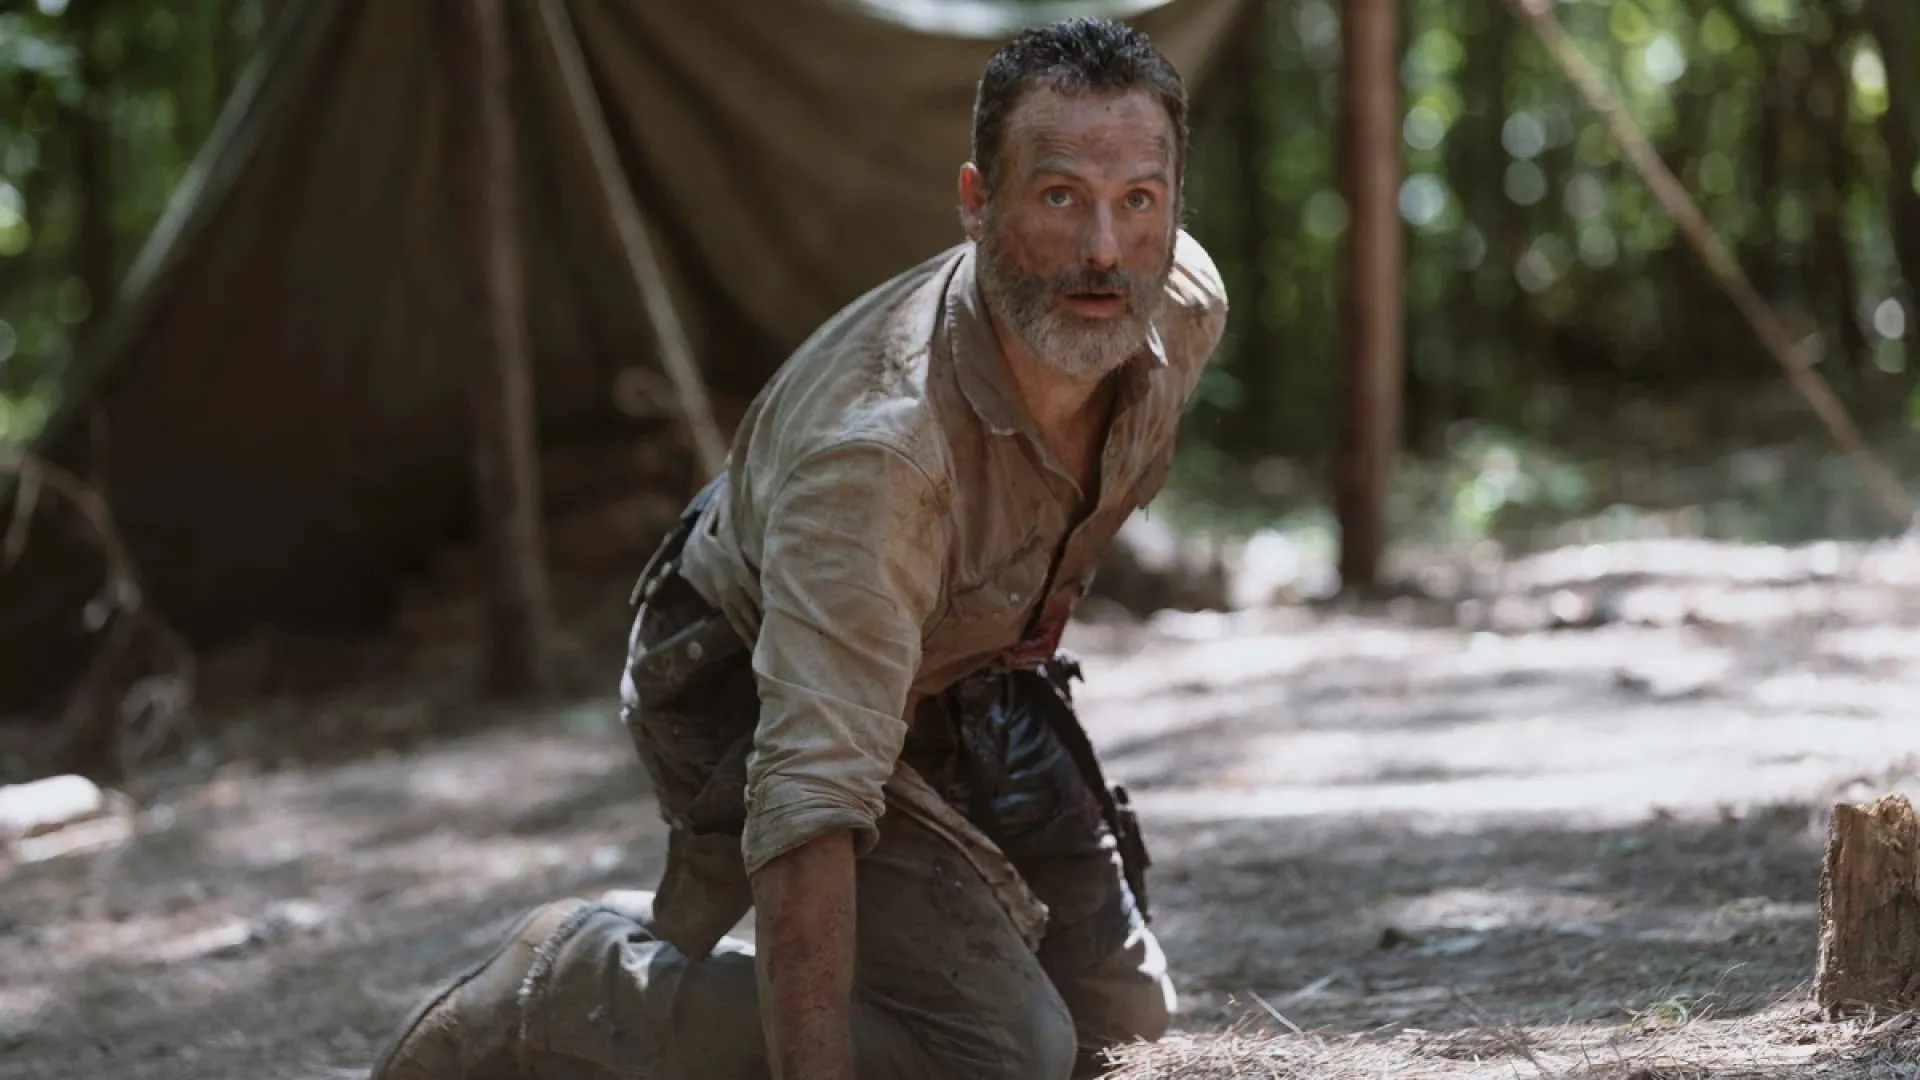 An injured Rick Grimes struggling to get away from walkers in The Walking Dead season 9